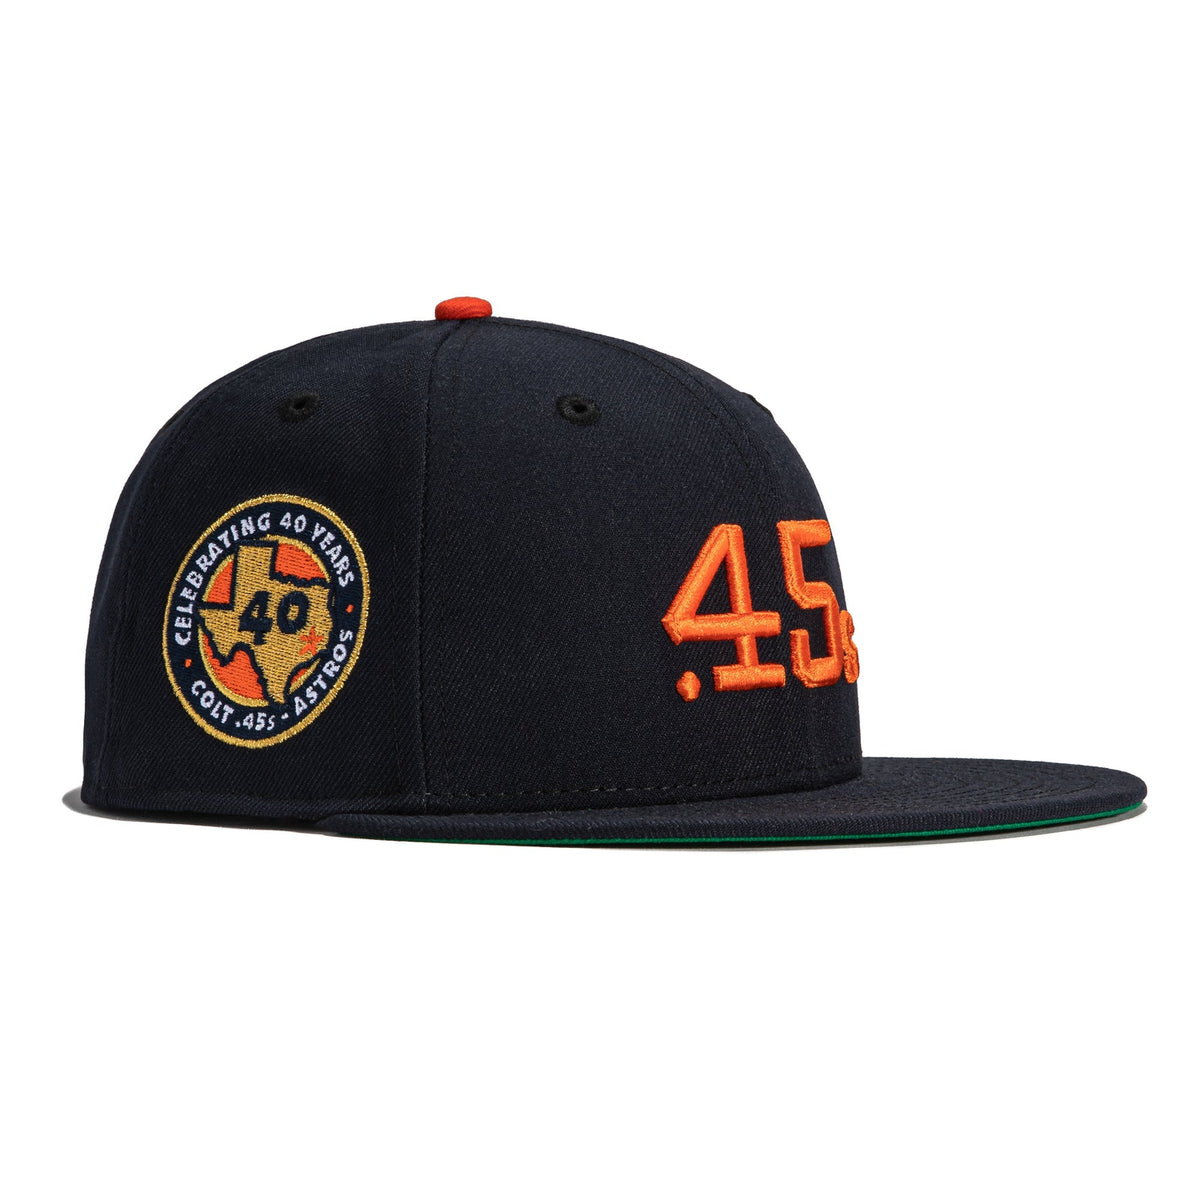 Shop New Era 59Fifty Houston Astros Colt 45's 40th Anniversary Patch Hat -  Navy New Era . Today you can browse the latest styles and top brands on the  internet